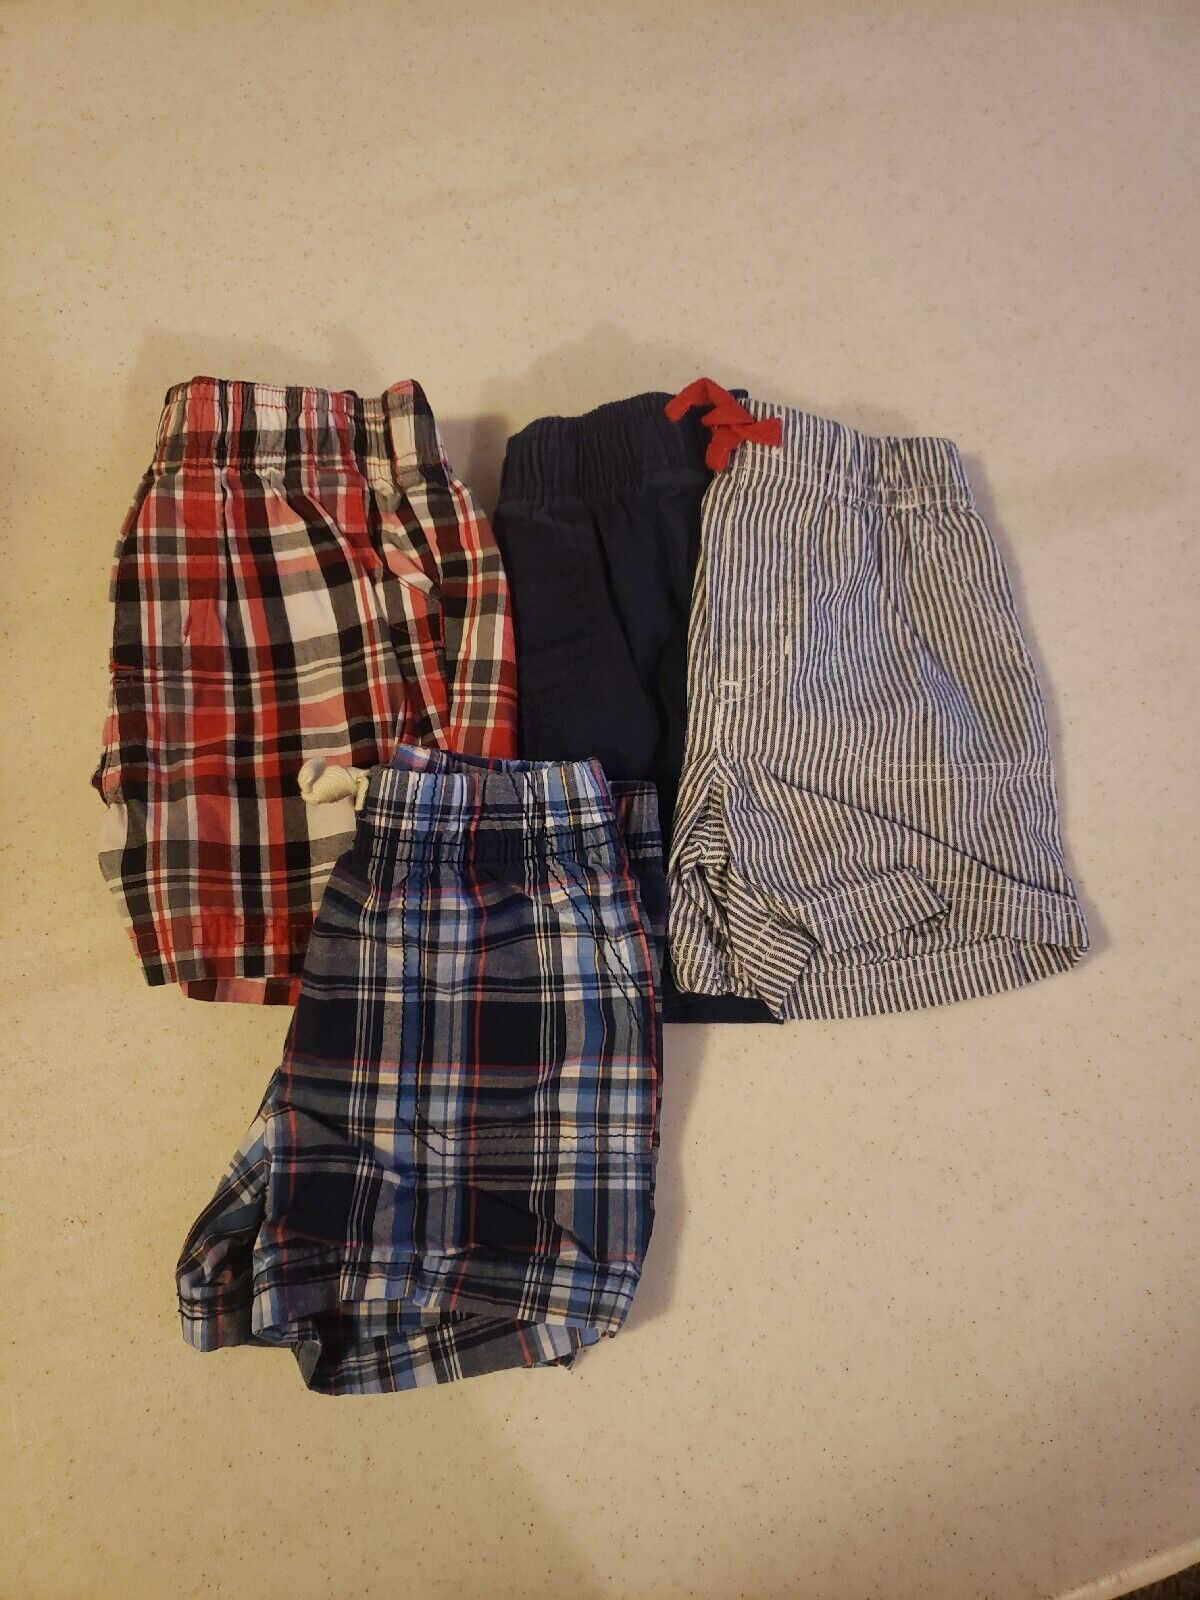 Boys 12 Months Lot Of 4 Pairs Of Shorts | eBay